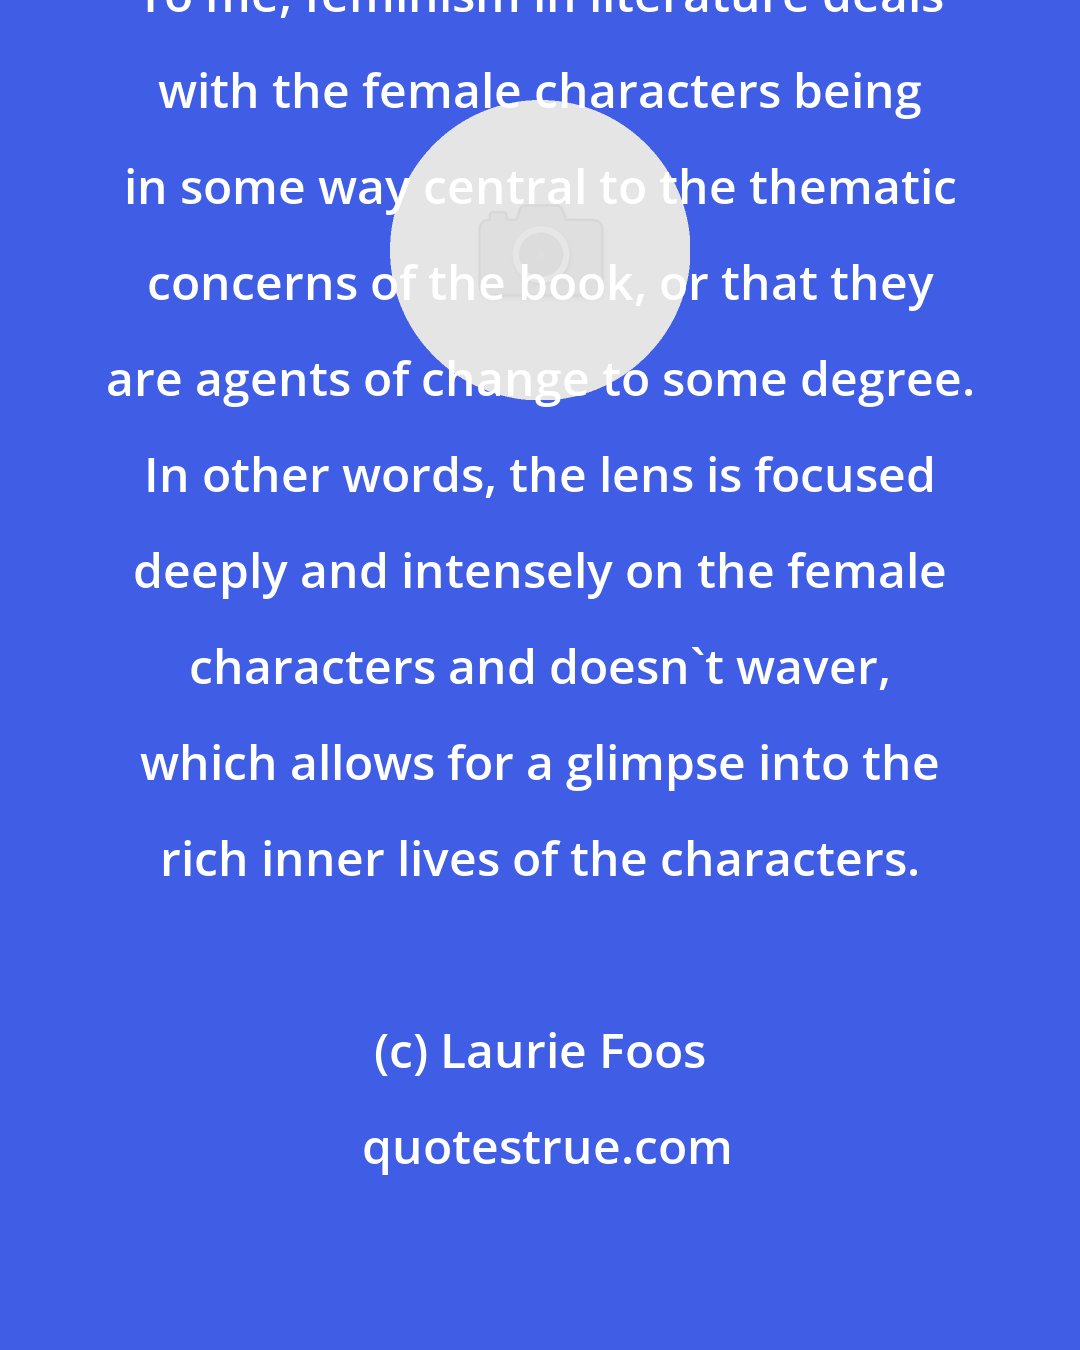 Laurie Foos: To me, feminism in literature deals with the female characters being in some way central to the thematic concerns of the book, or that they are agents of change to some degree. In other words, the lens is focused deeply and intensely on the female characters and doesn't waver, which allows for a glimpse into the rich inner lives of the characters.